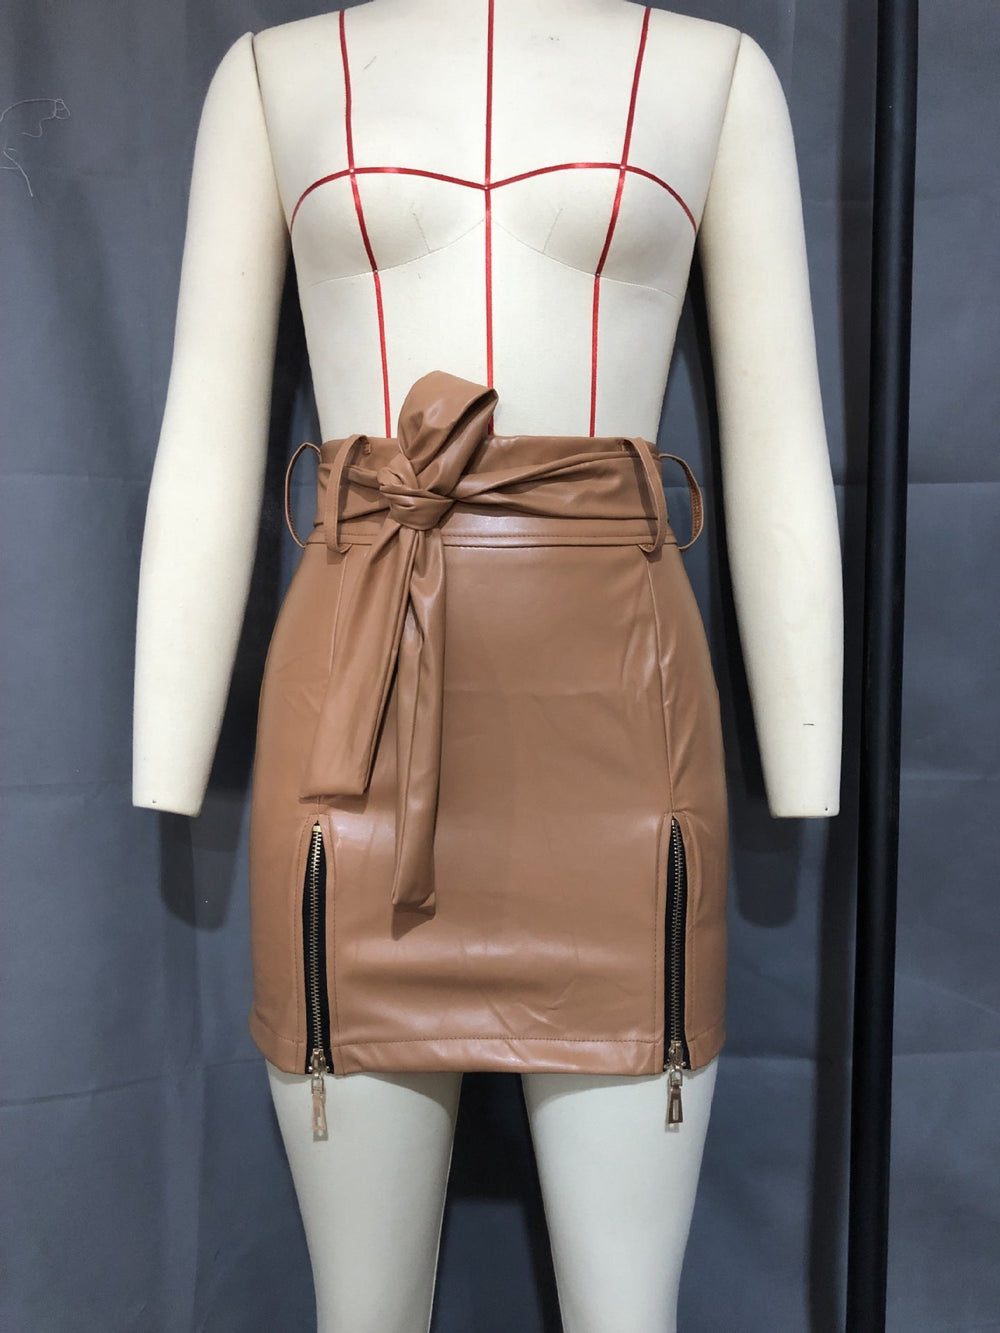 Leather Skirt Faux Leather Sexy Lace-up Zipper High Waist Sheath Skirt